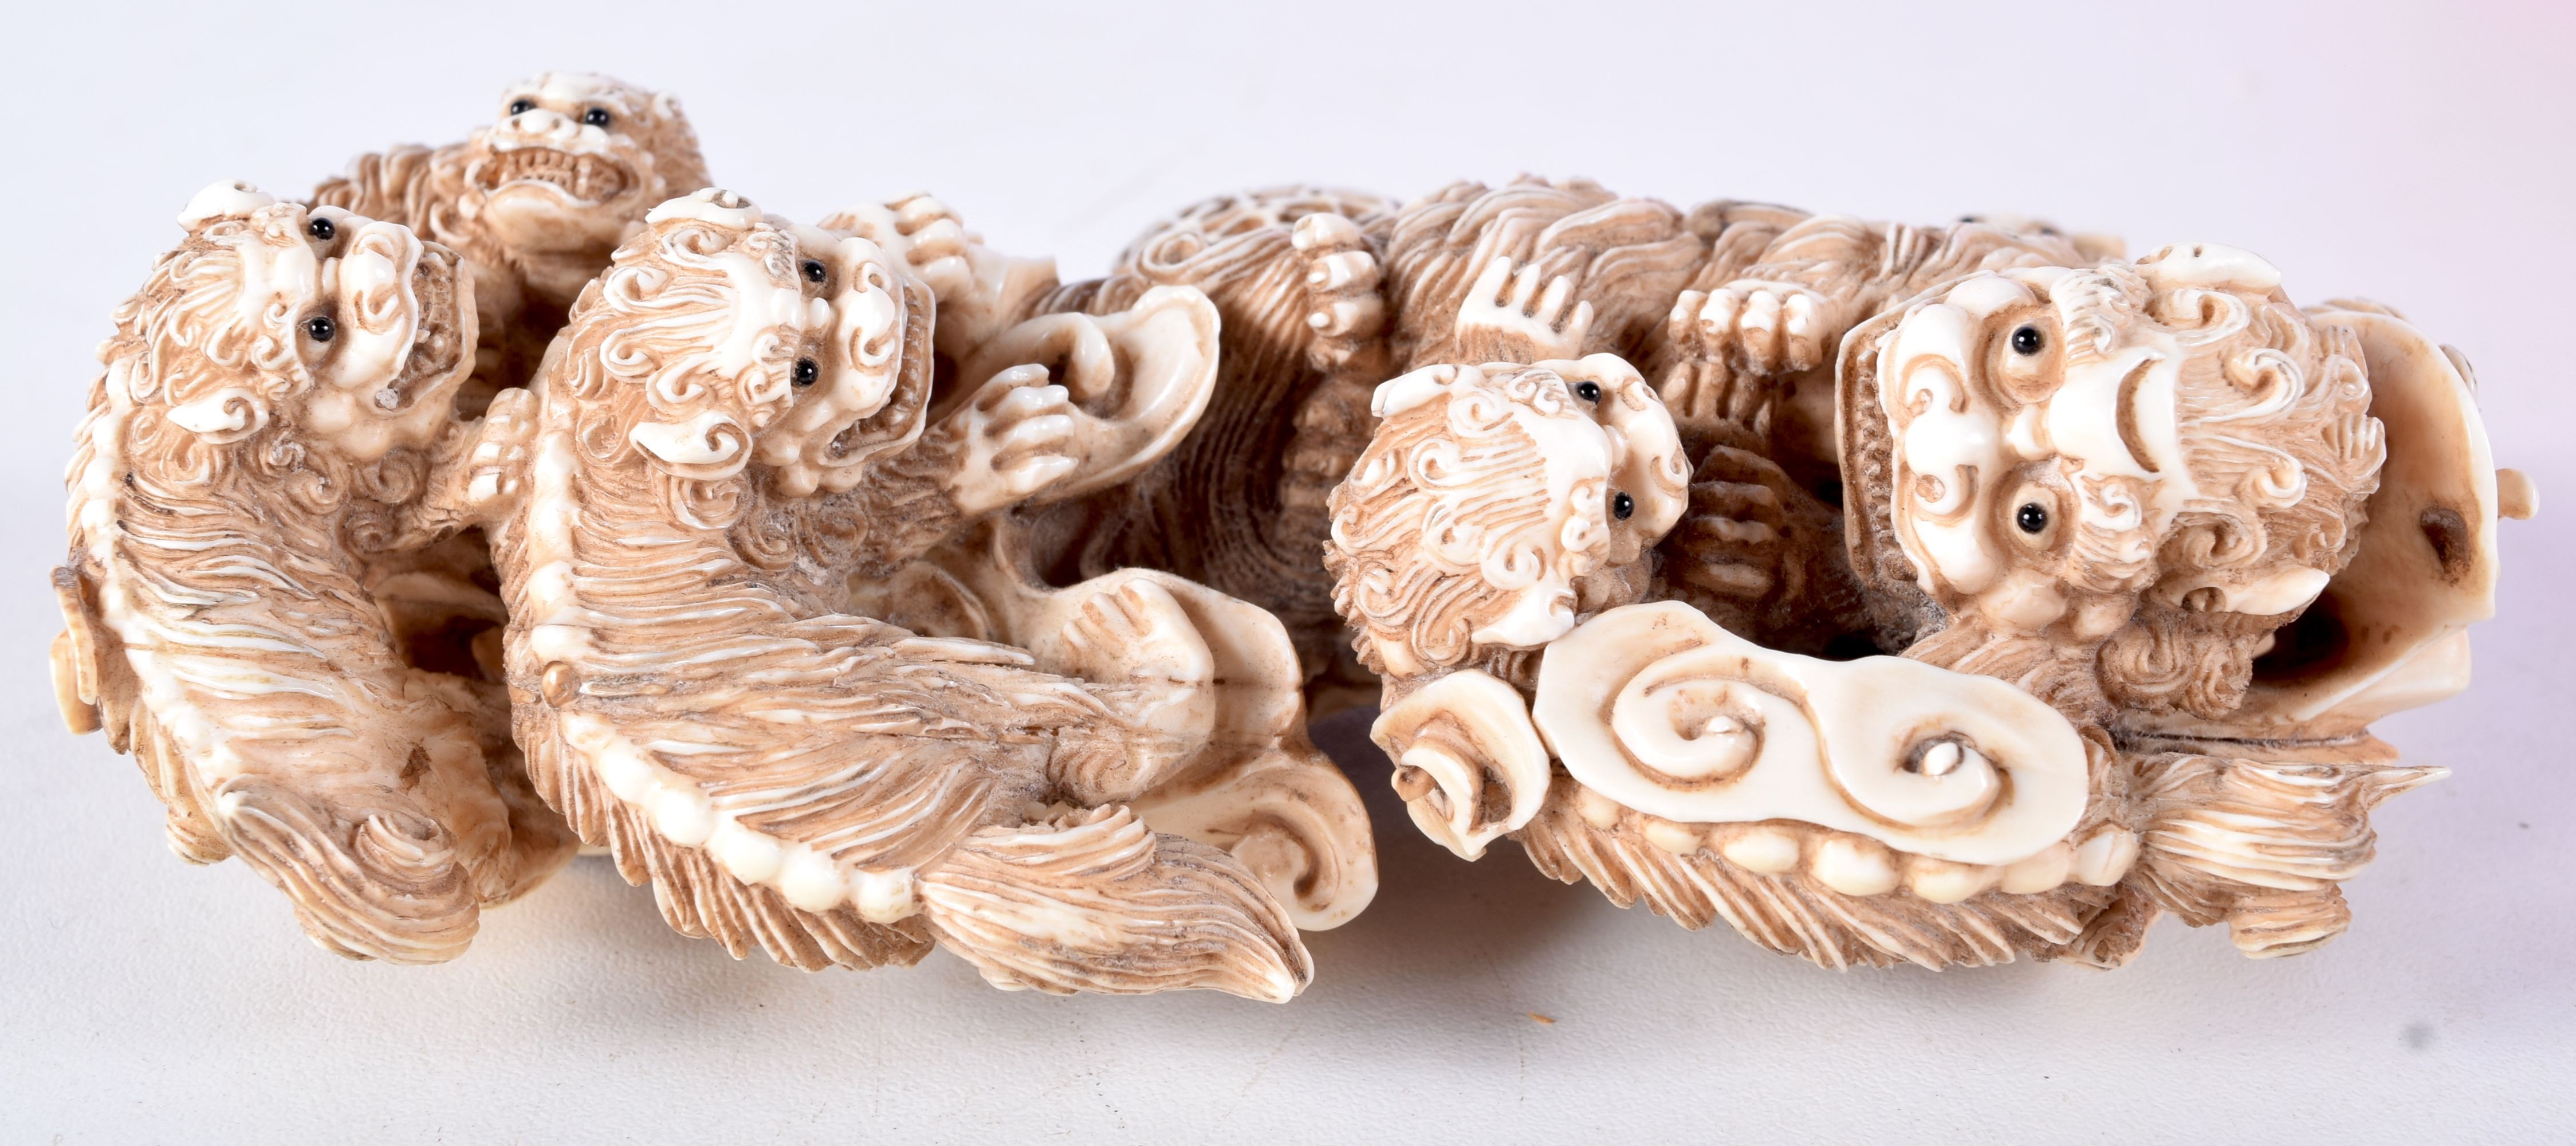 A FINE 19TH CENTURY JAPANESE MEIJI PERIOD CARVED IVORY OKIMONO modelled as numerous beasts in a play - Image 4 of 5